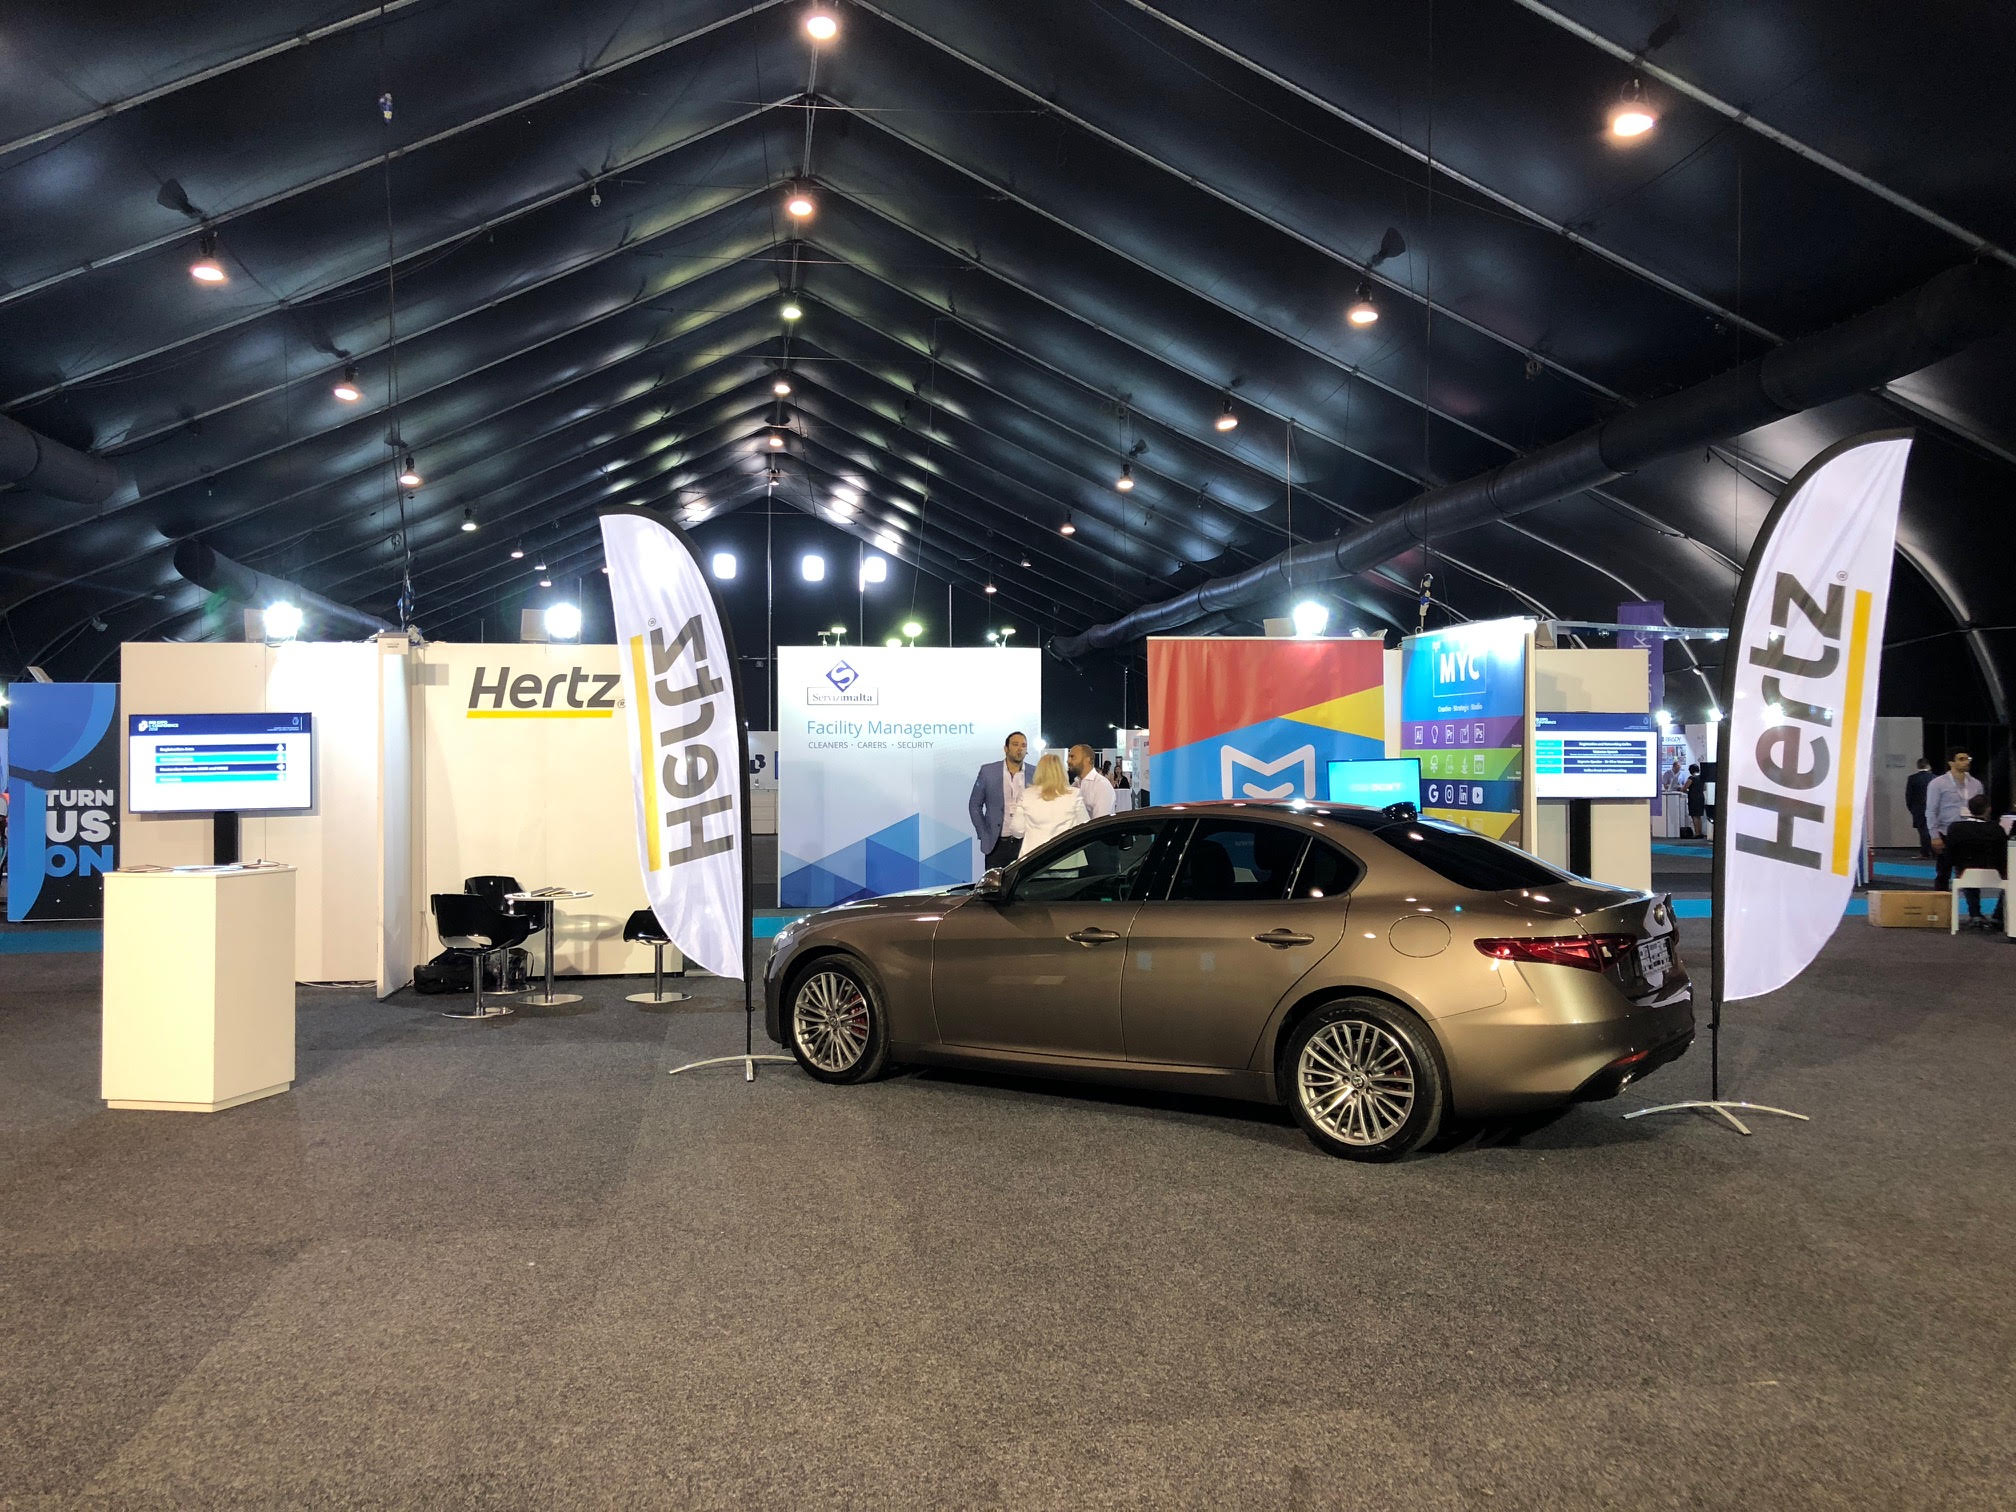 Hertz Lease booth at the Malta B2B Expo